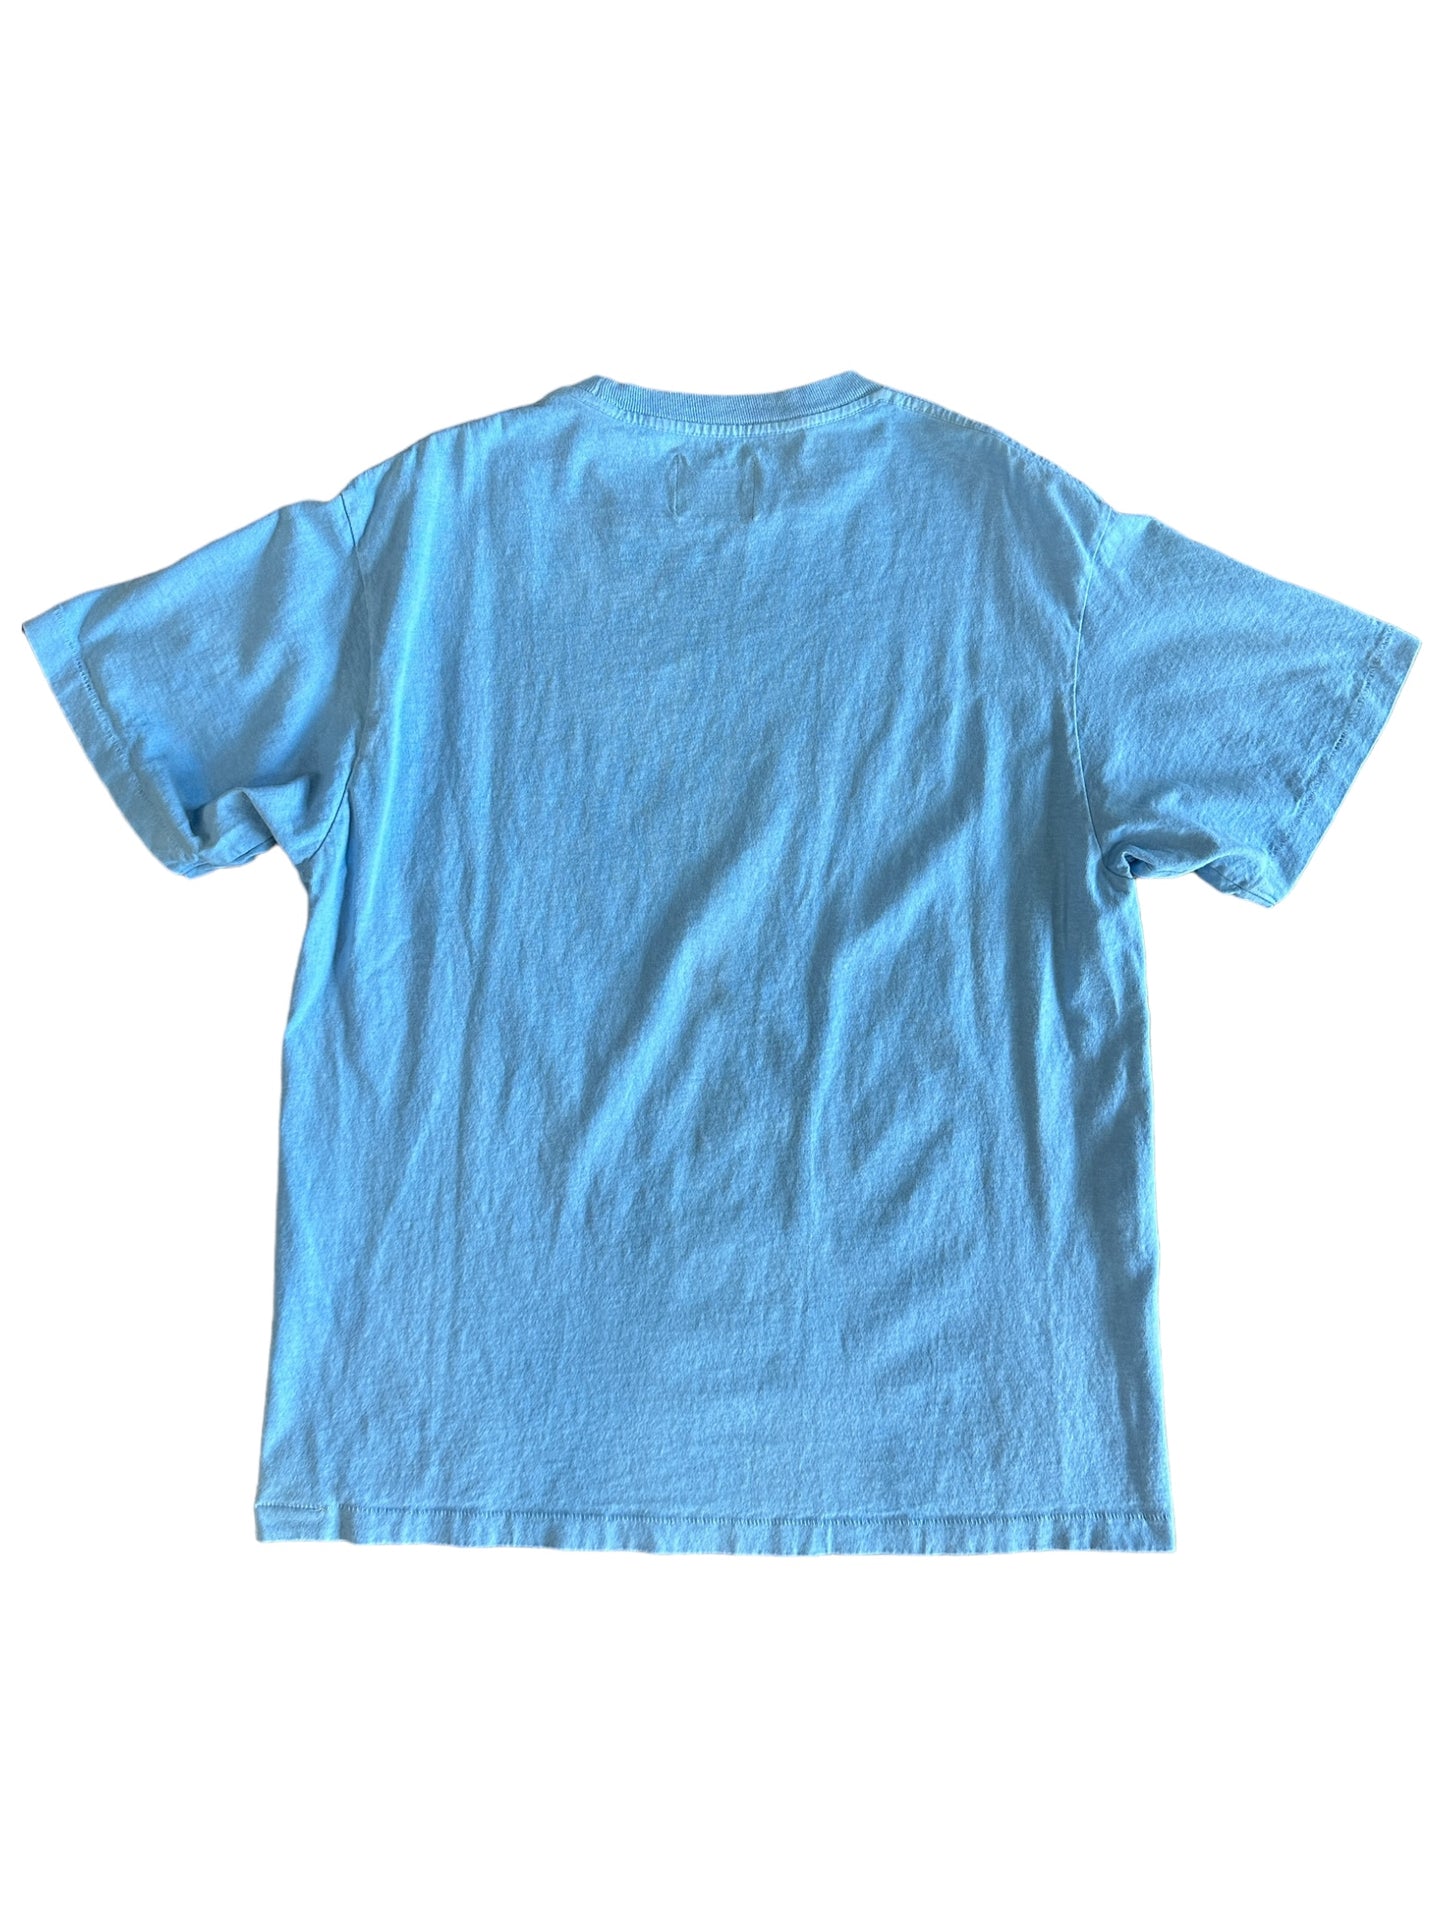 Gallery Dept 80’s Tee Shirt Blue Size M Pre-owned